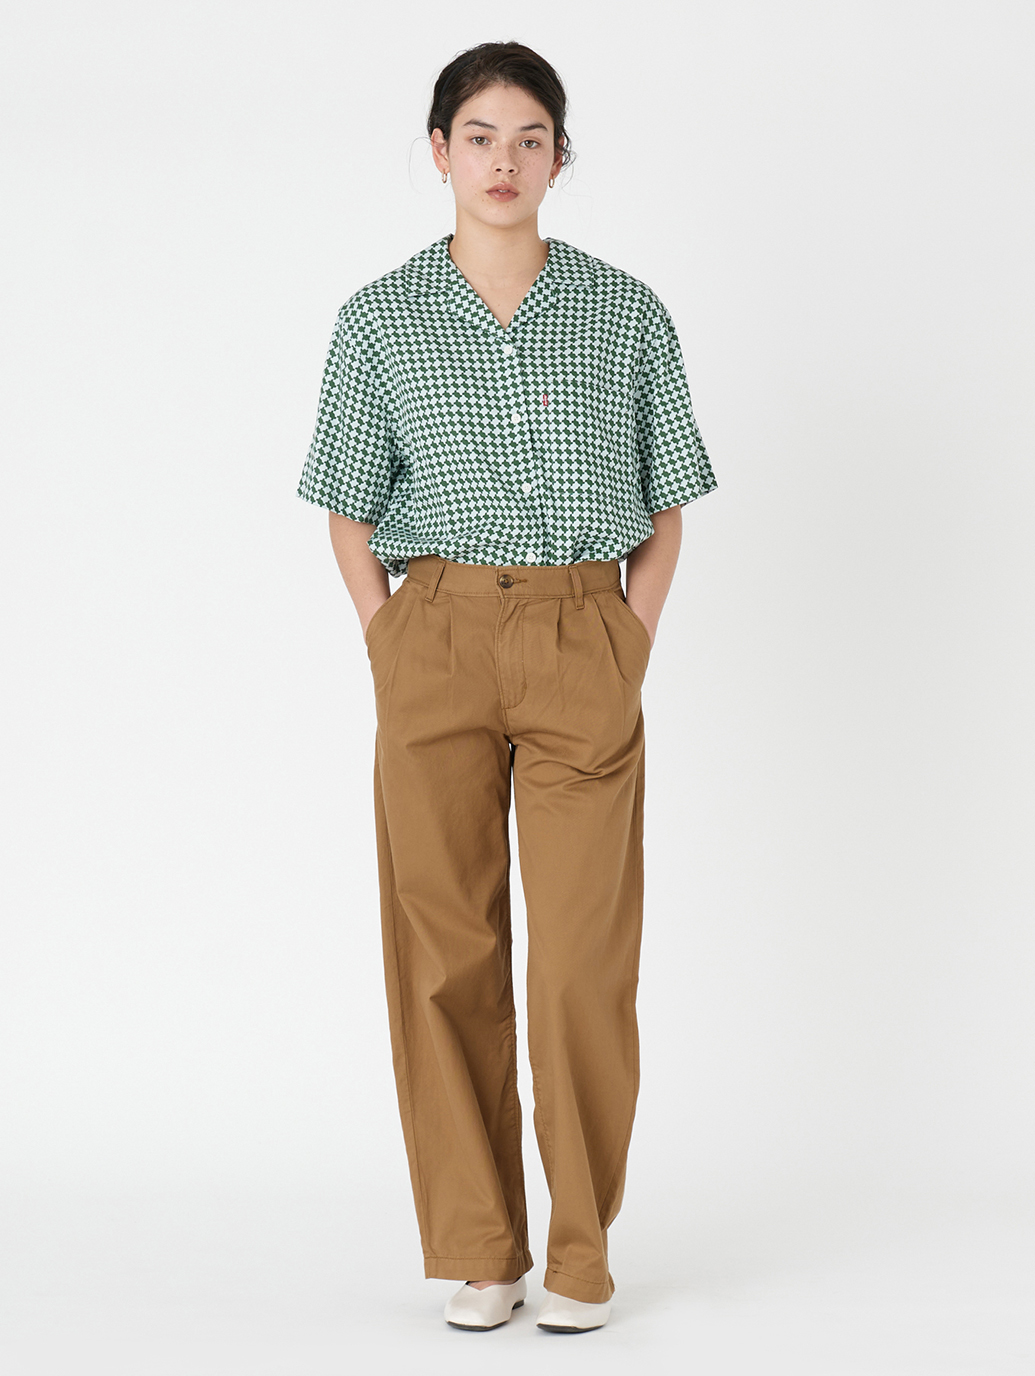 HR PLEATED BAGGY TROUSER ブラウン FOXTROT BROWN｜リーバイス® 公式通販